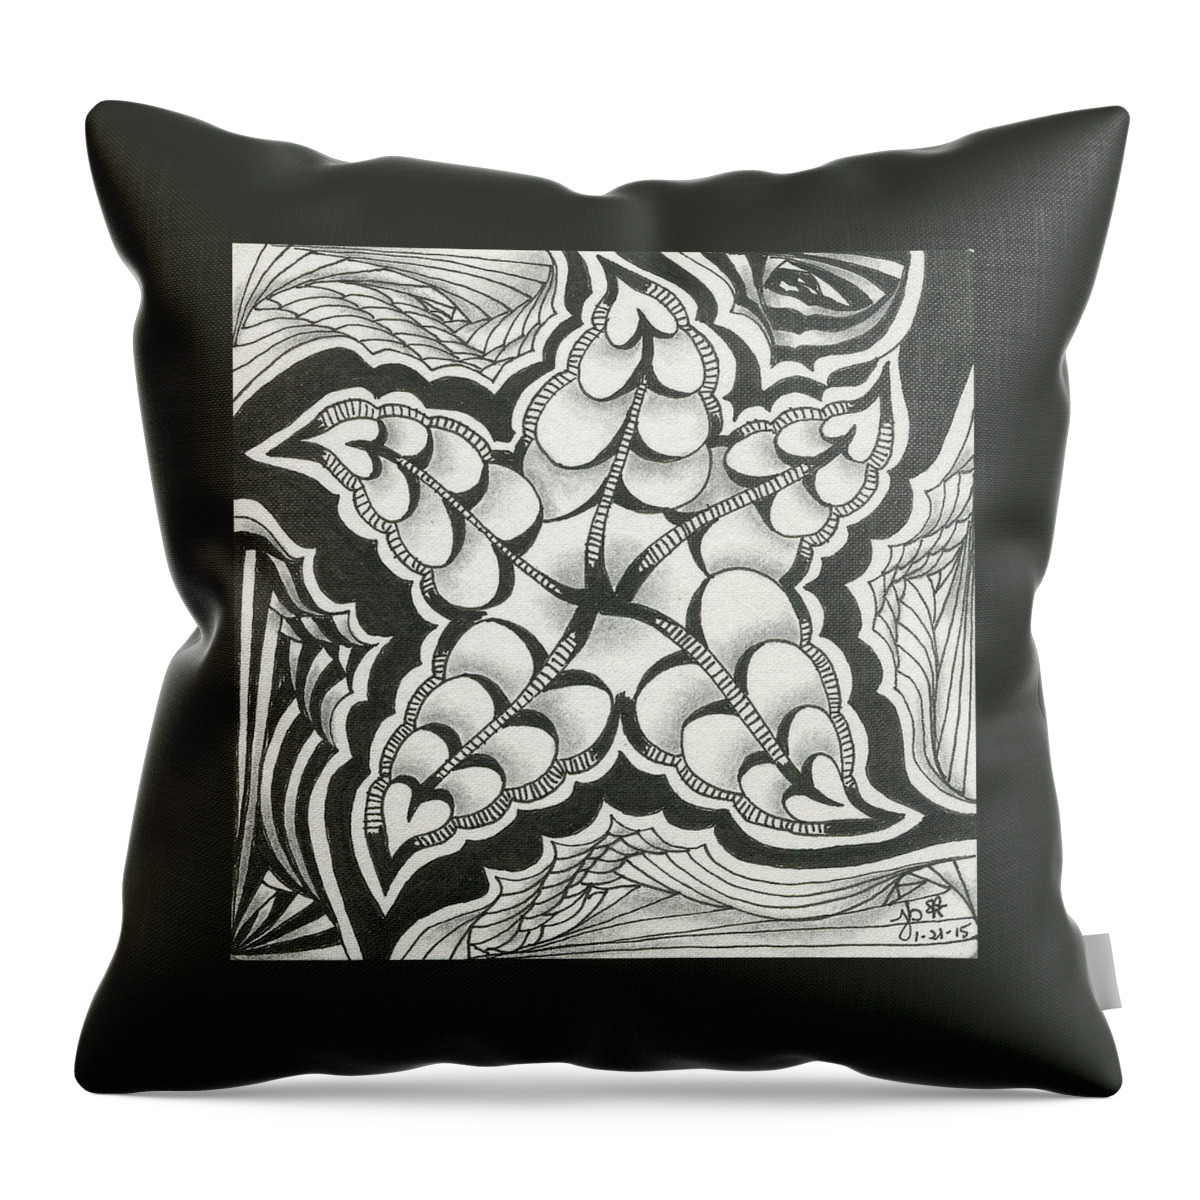 Zentangle Throw Pillow featuring the drawing A Woman's Heart by Jan Steinle